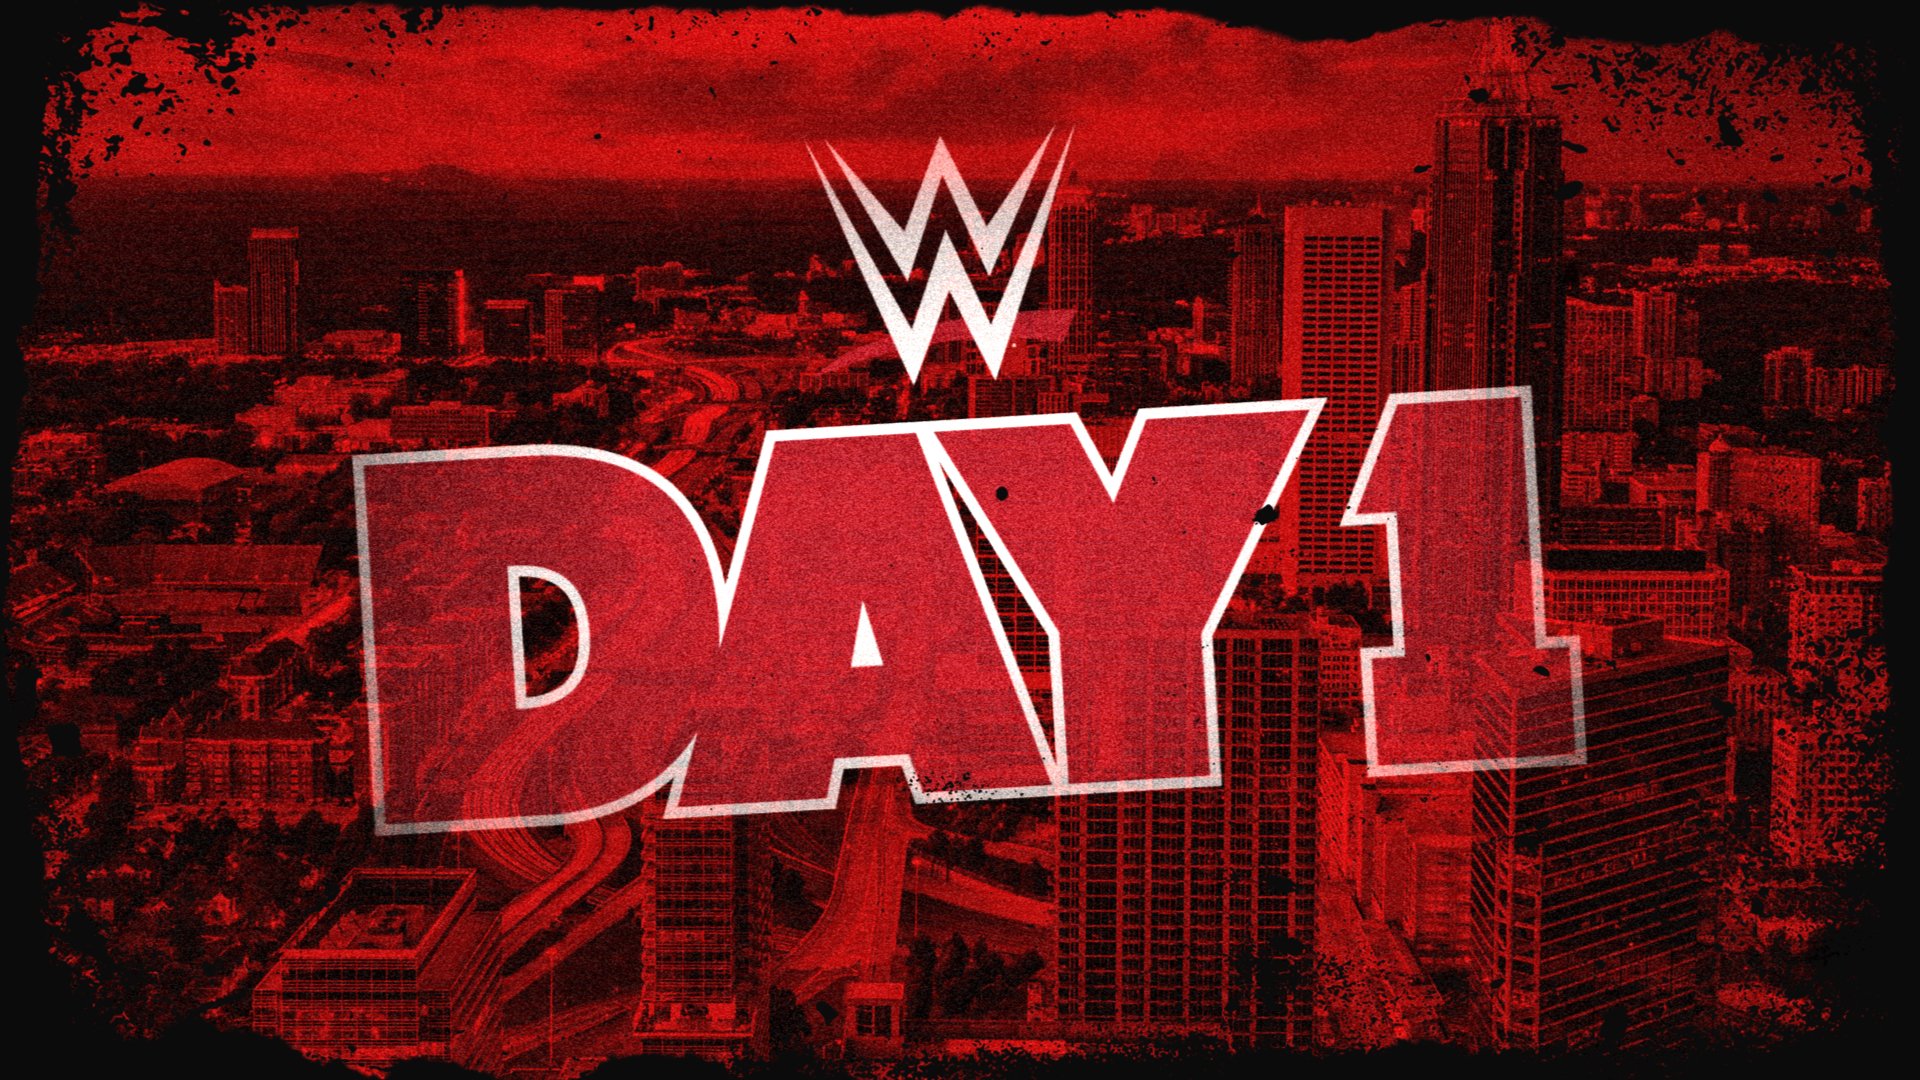 WWE Day 1: Here's All You Need to Know about WWE's latest PPV event